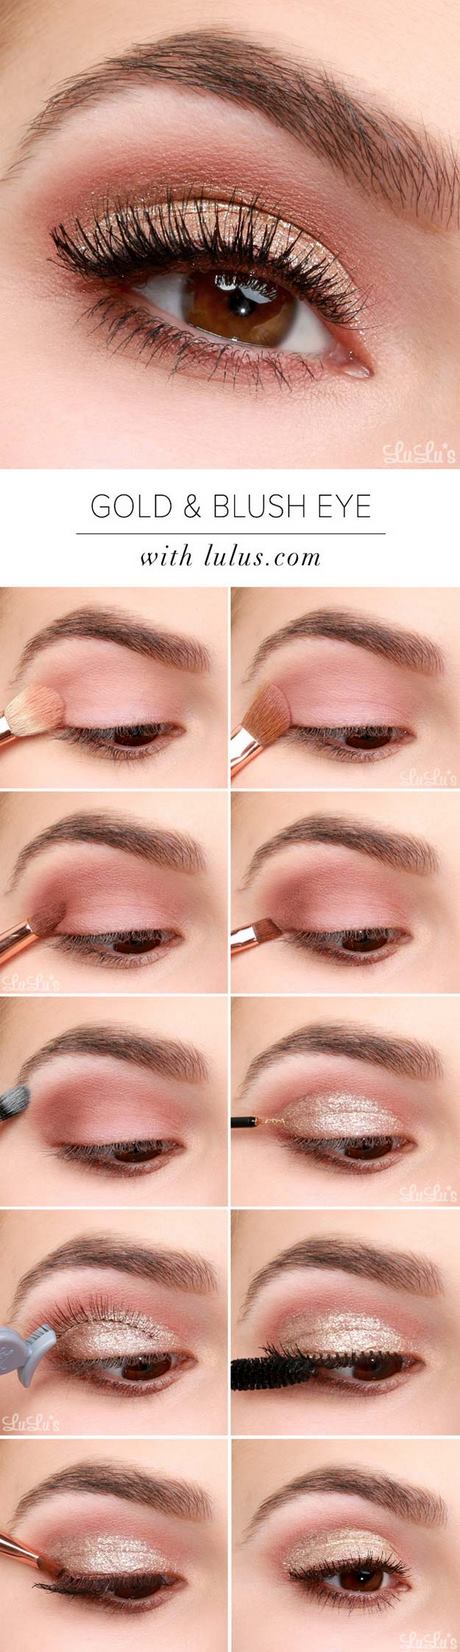 makeup-tips-for-pictures-91_3 Make-up tips voor foto  s